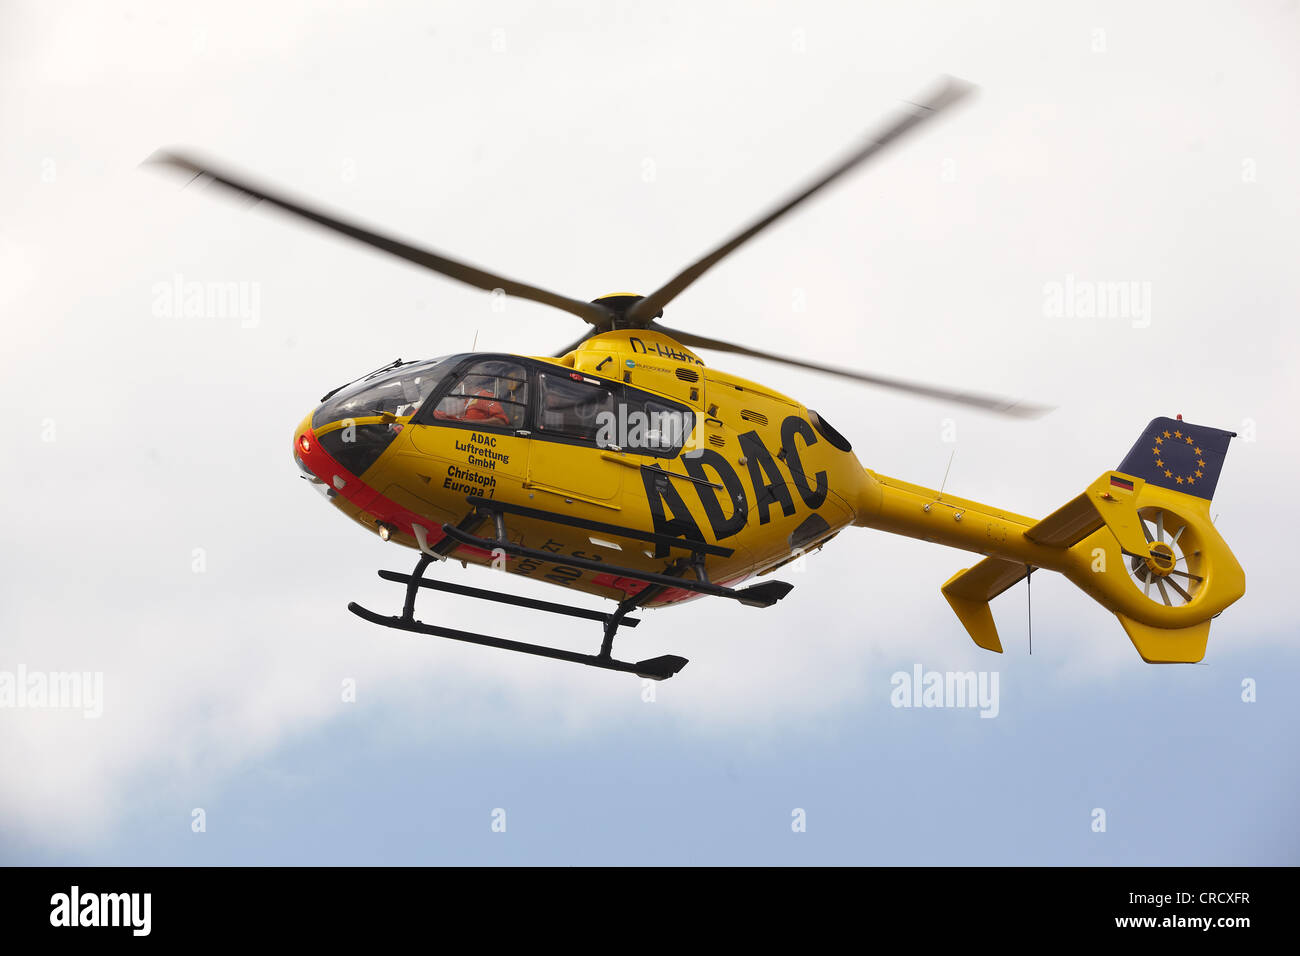 Eurocopter EC 135 ADAC or German Auto Club rescue helicopter, Koblenz, Rhineland-Palatinate, Germany, Europe Stock Photo